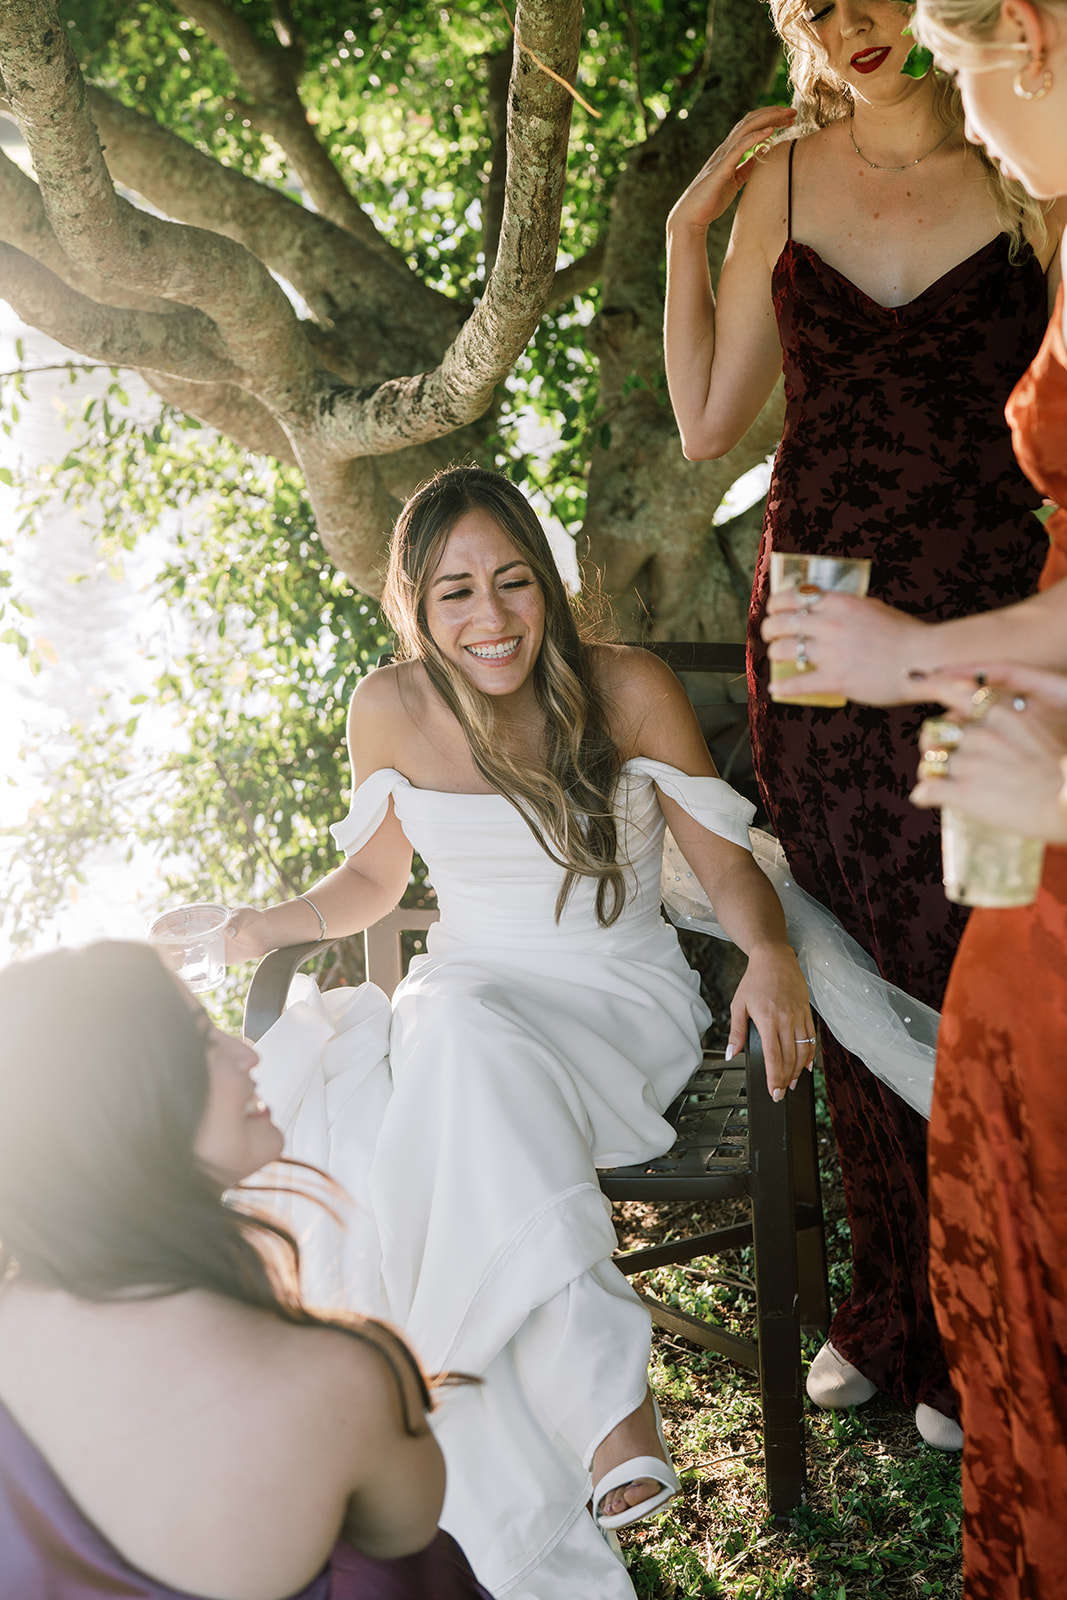 A bride in a white dress laughing with her bridesmaids in a garden setting during a Hawaiian Wedding Reception